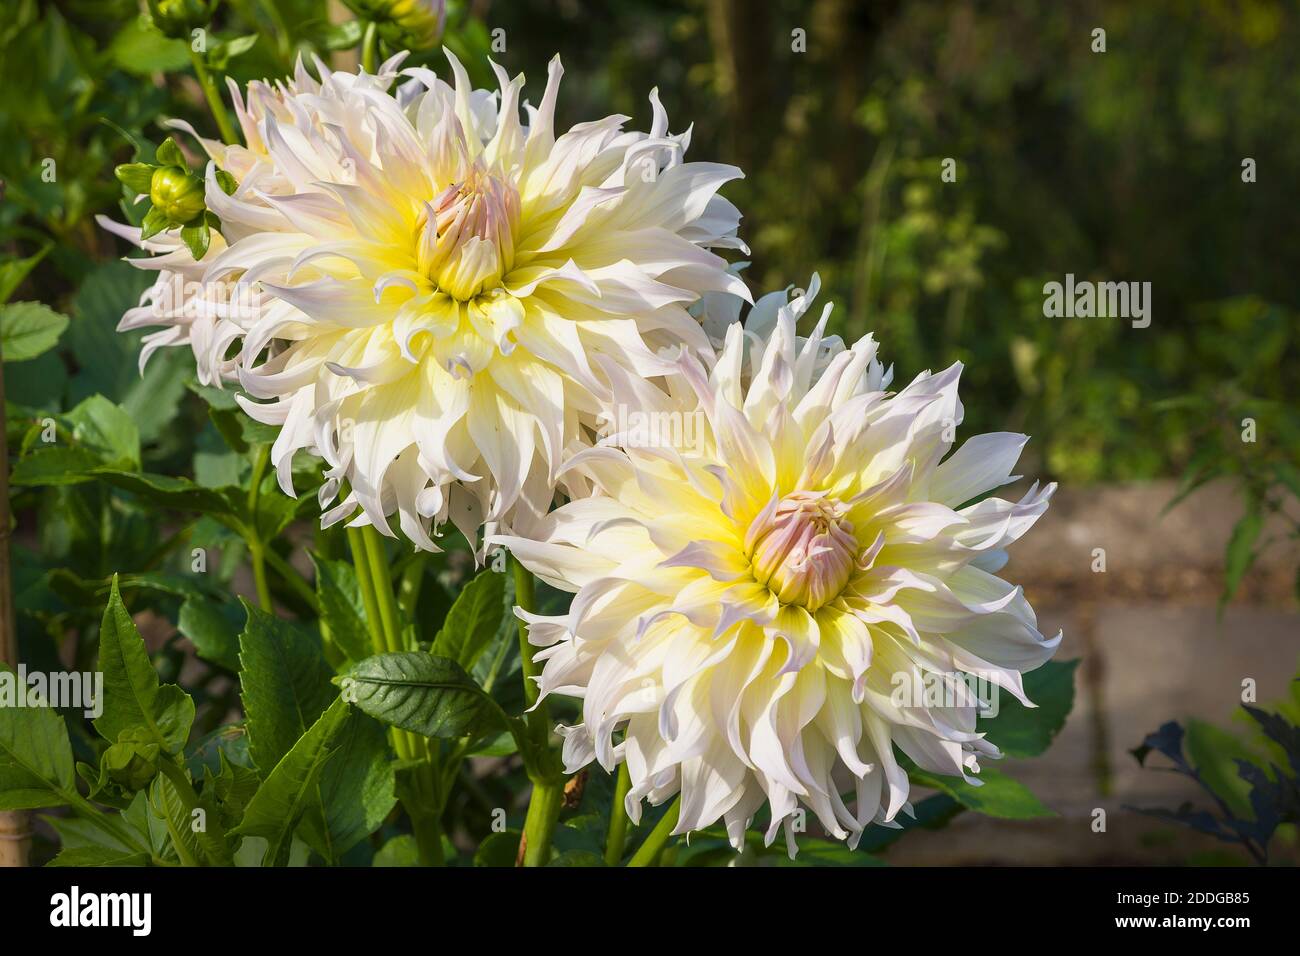 Dahlia Wynn's Farmer John with creamy white tinged yellow large flower heads growing in an English garden in August Stock Photo